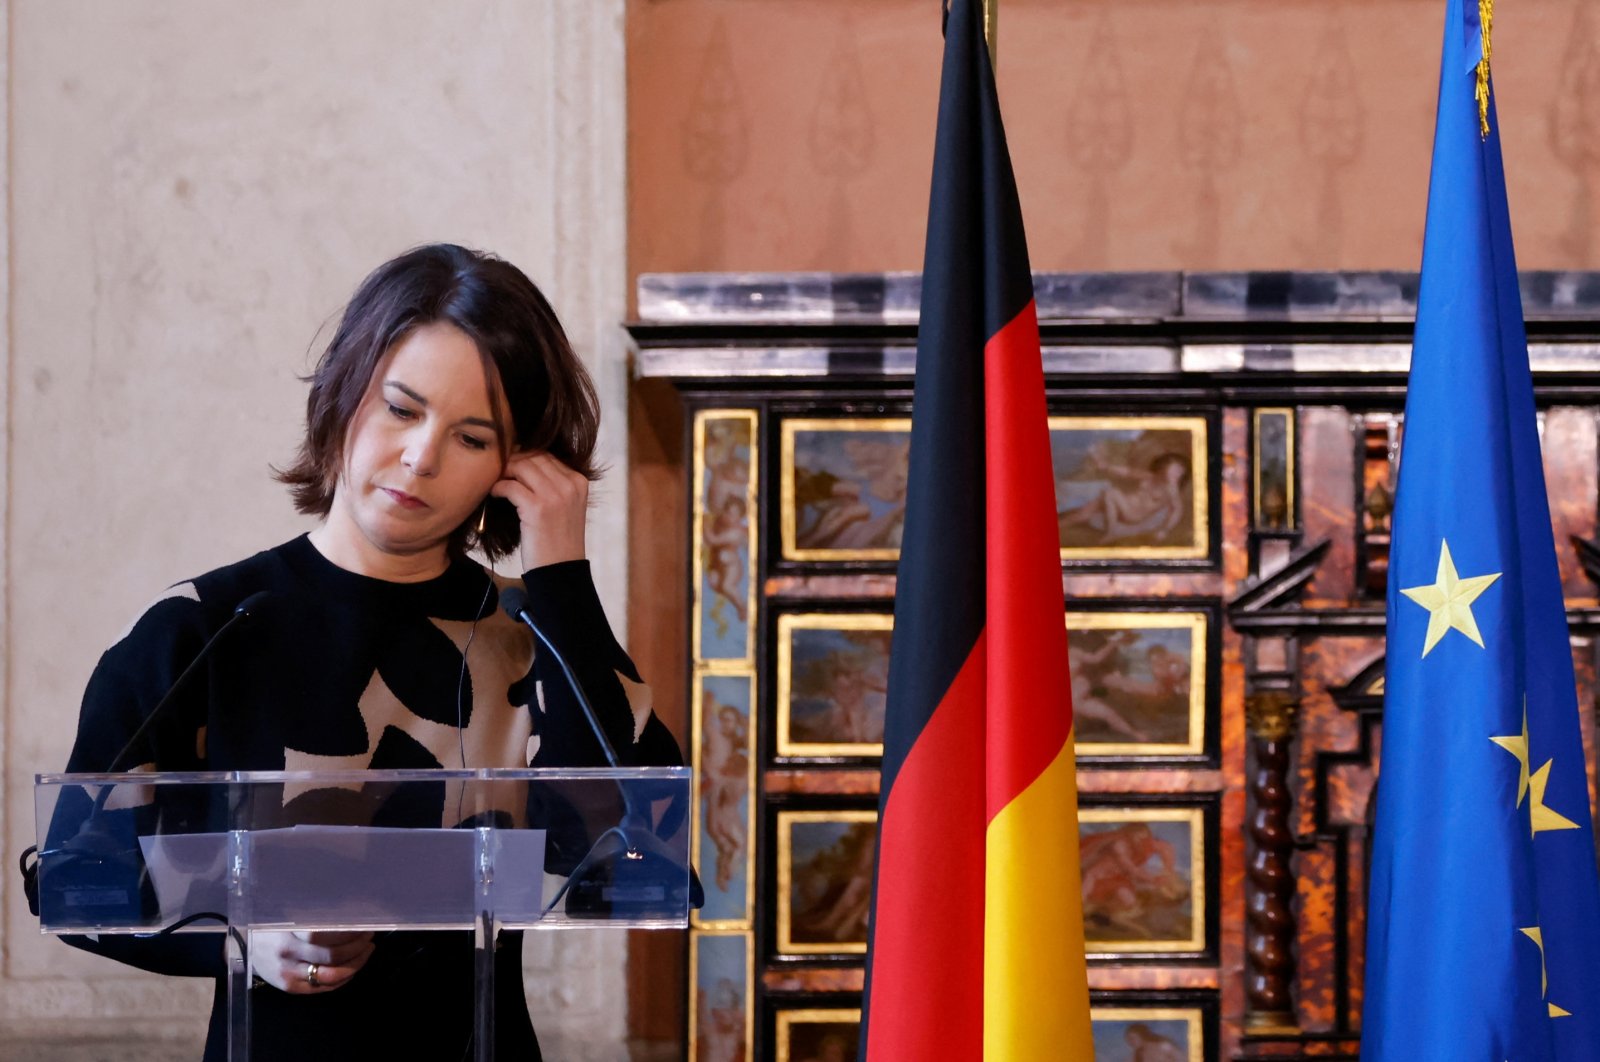 German Foreign Minister Annalena Baerboc addresses a news conference after a meeting in Villa Madama, Rome, Italy, Jan. 10, 2022. (REUTERS Photo)